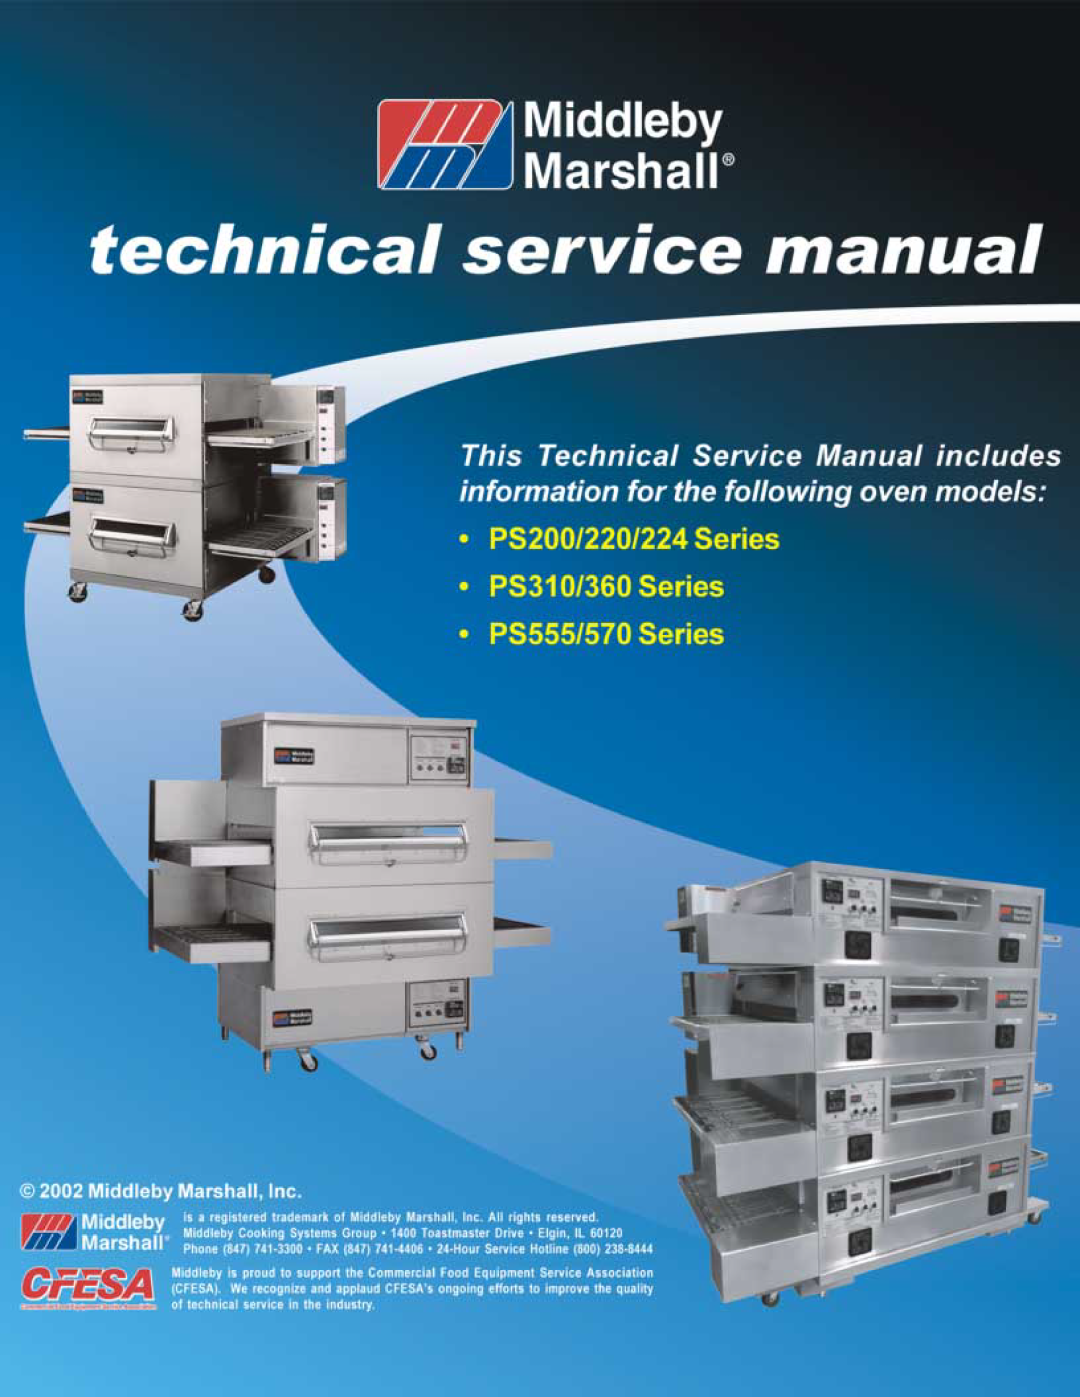 Middleby Marshall PS360, PS570, PS200, PS555, PS220, PS224 PS310 manual 